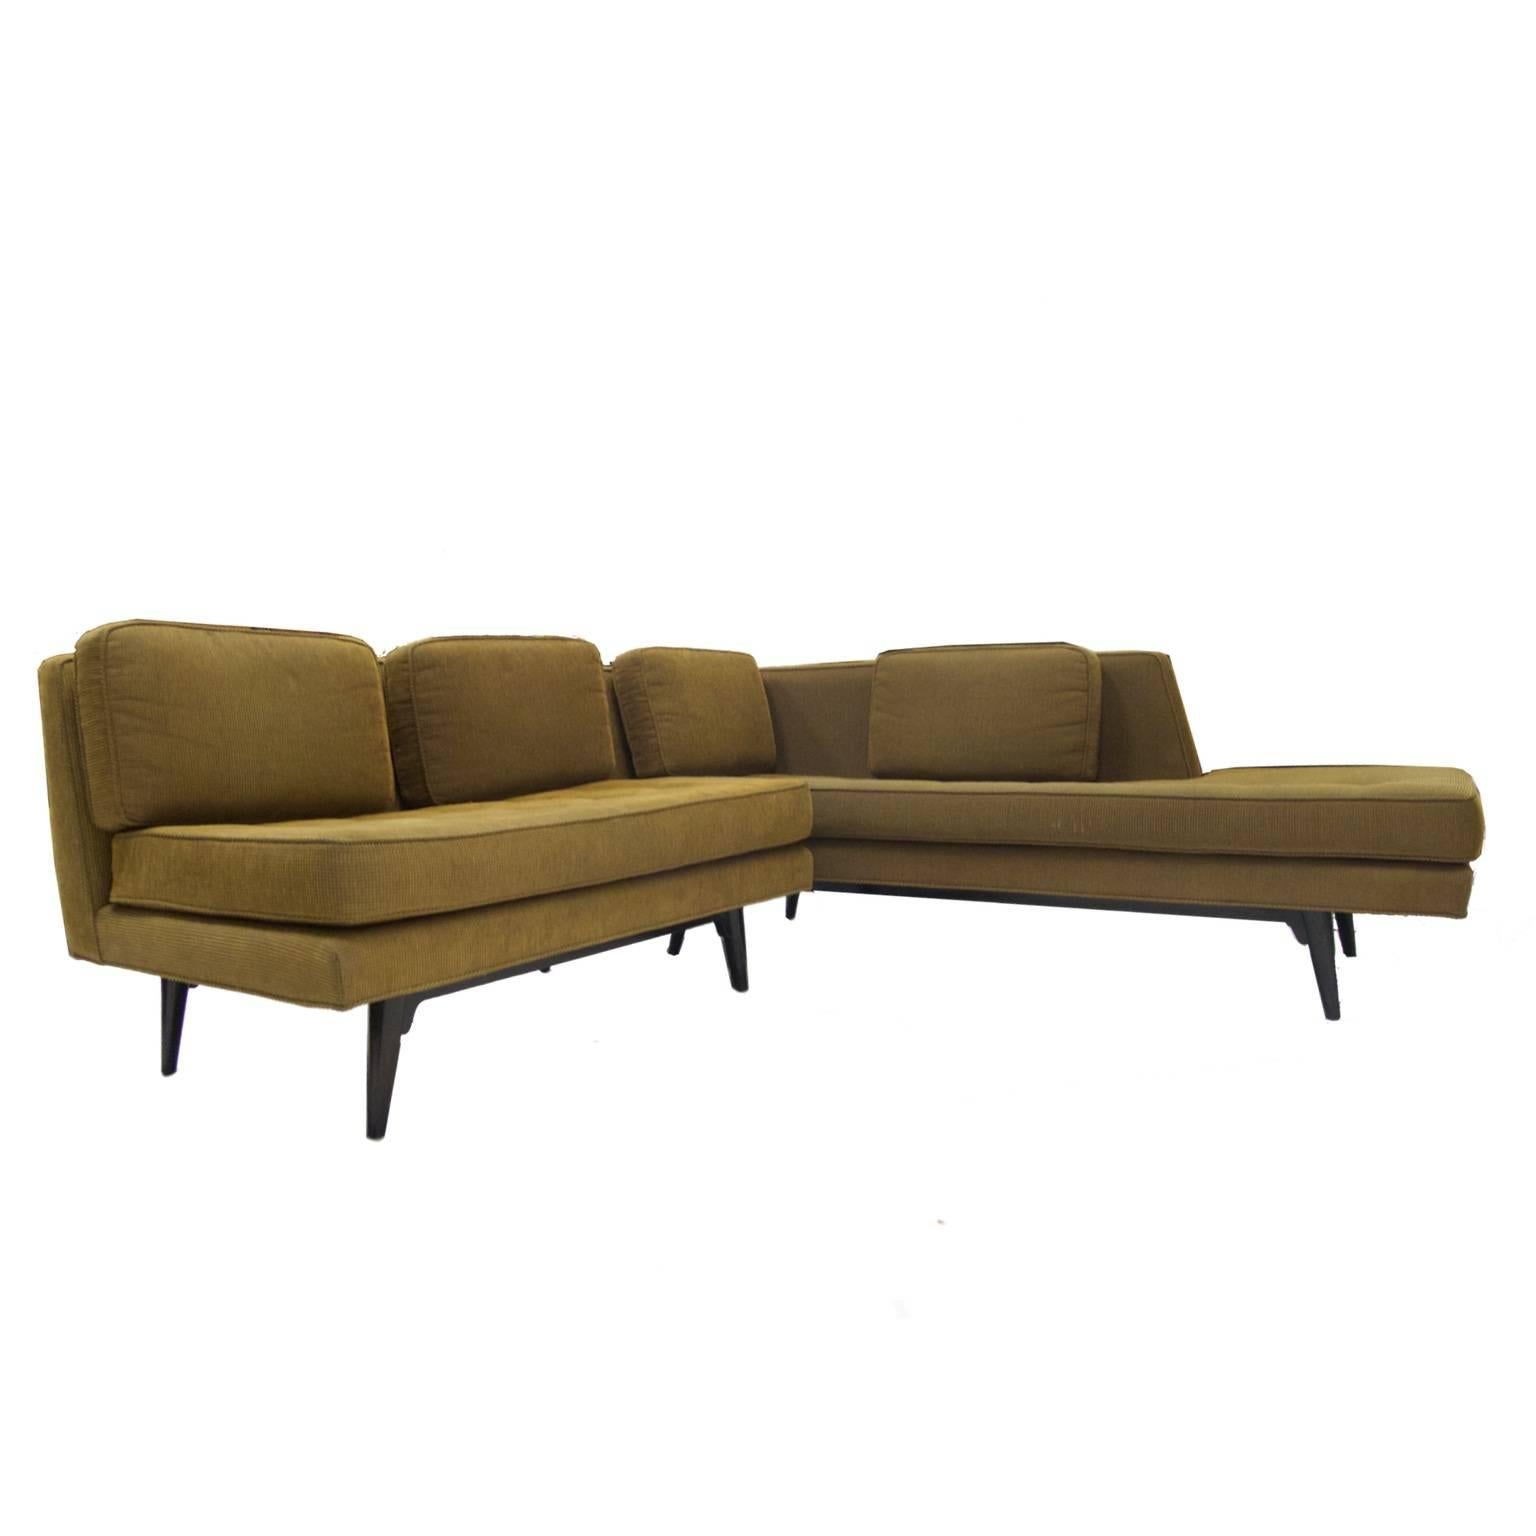 A very rare sleek Dunbar two-piece sectional with very desirable #5525 chaise.